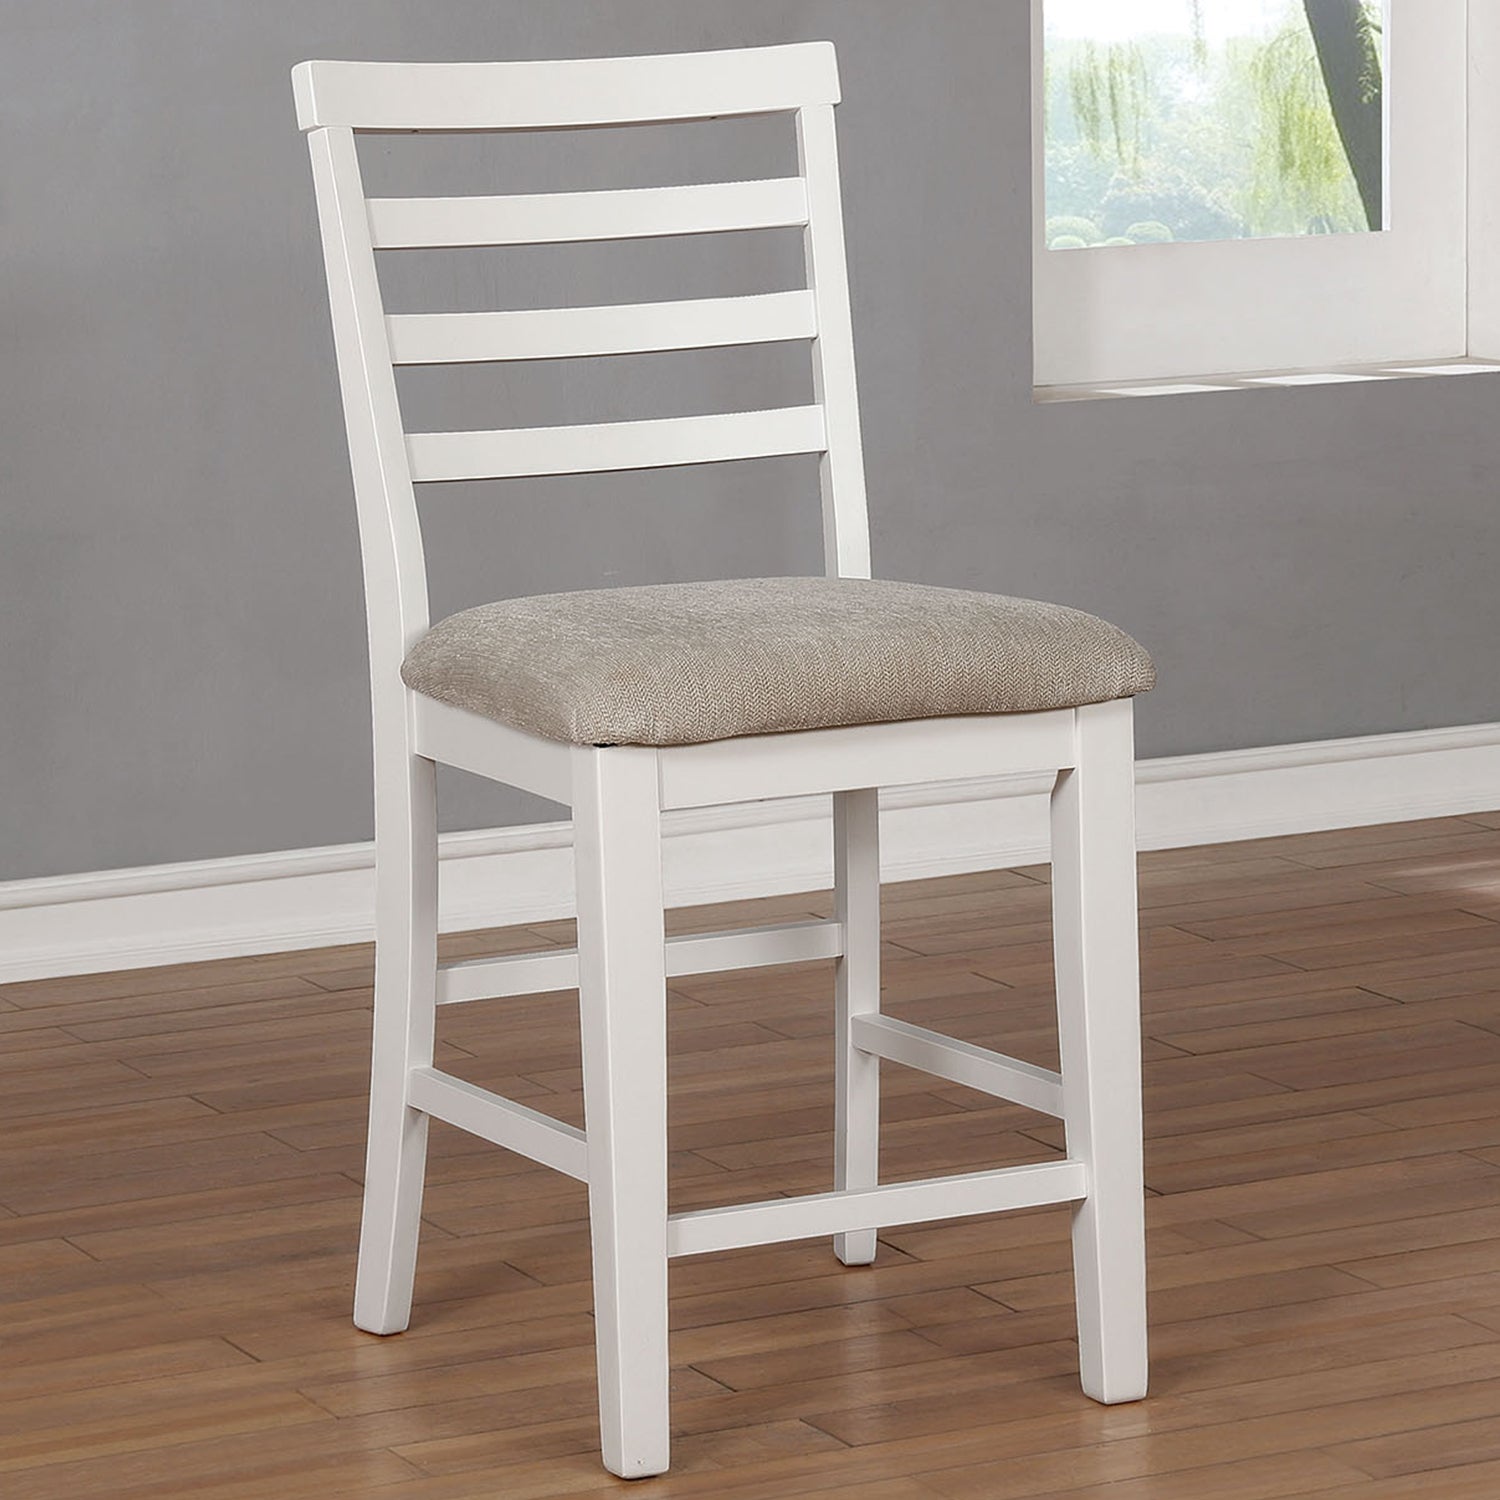 Set of 2 Padded Fabric Counter Height Chairs in White